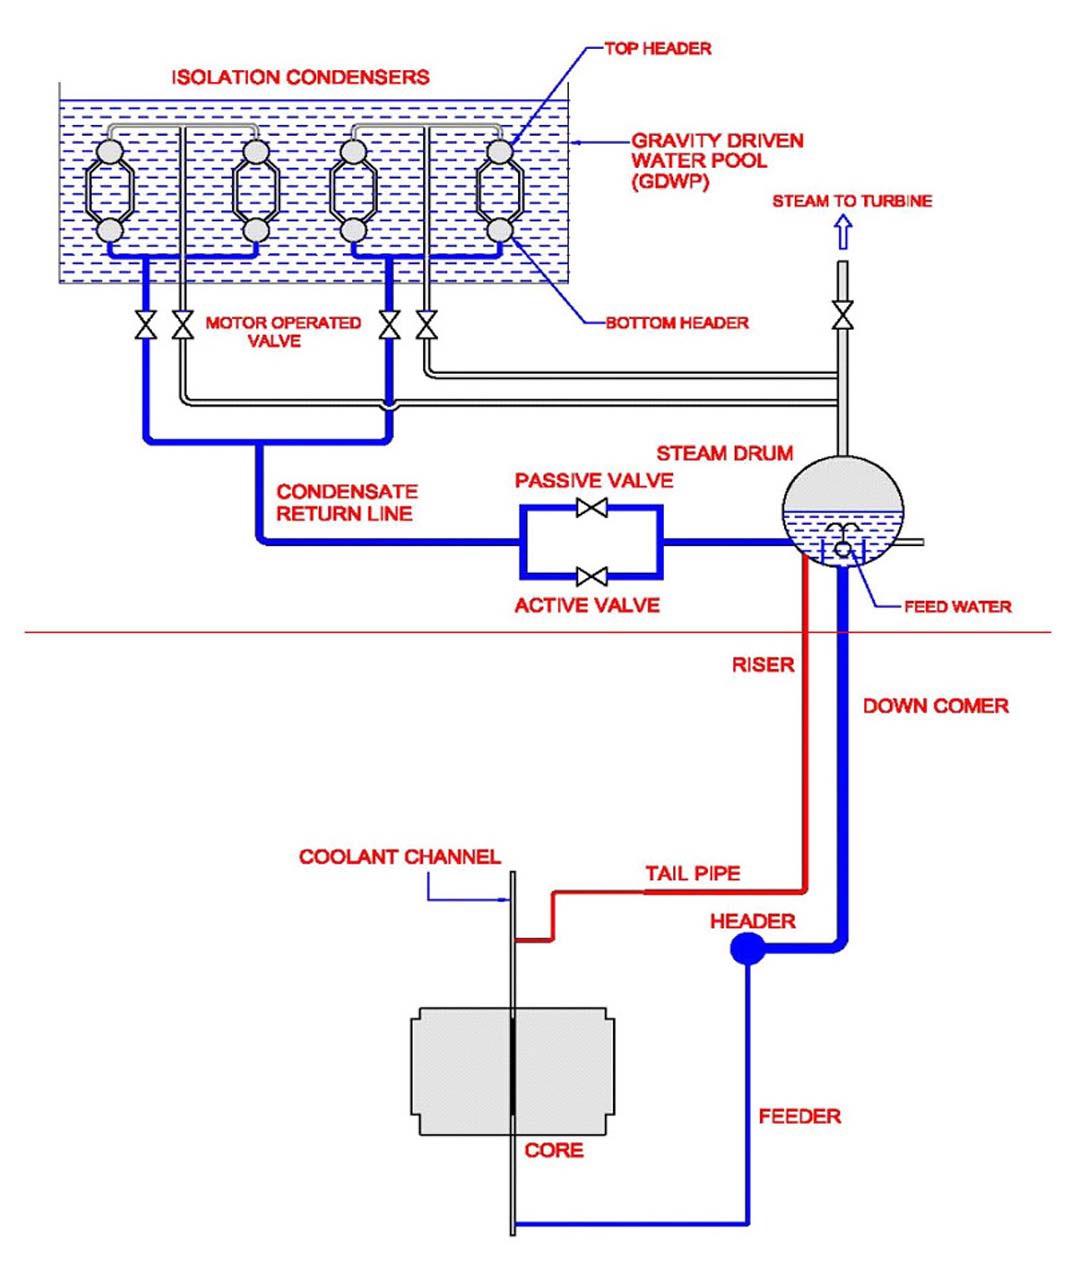 Schematic of Main Heat Transport System and Passive Decay Heat Removal System of AHWR